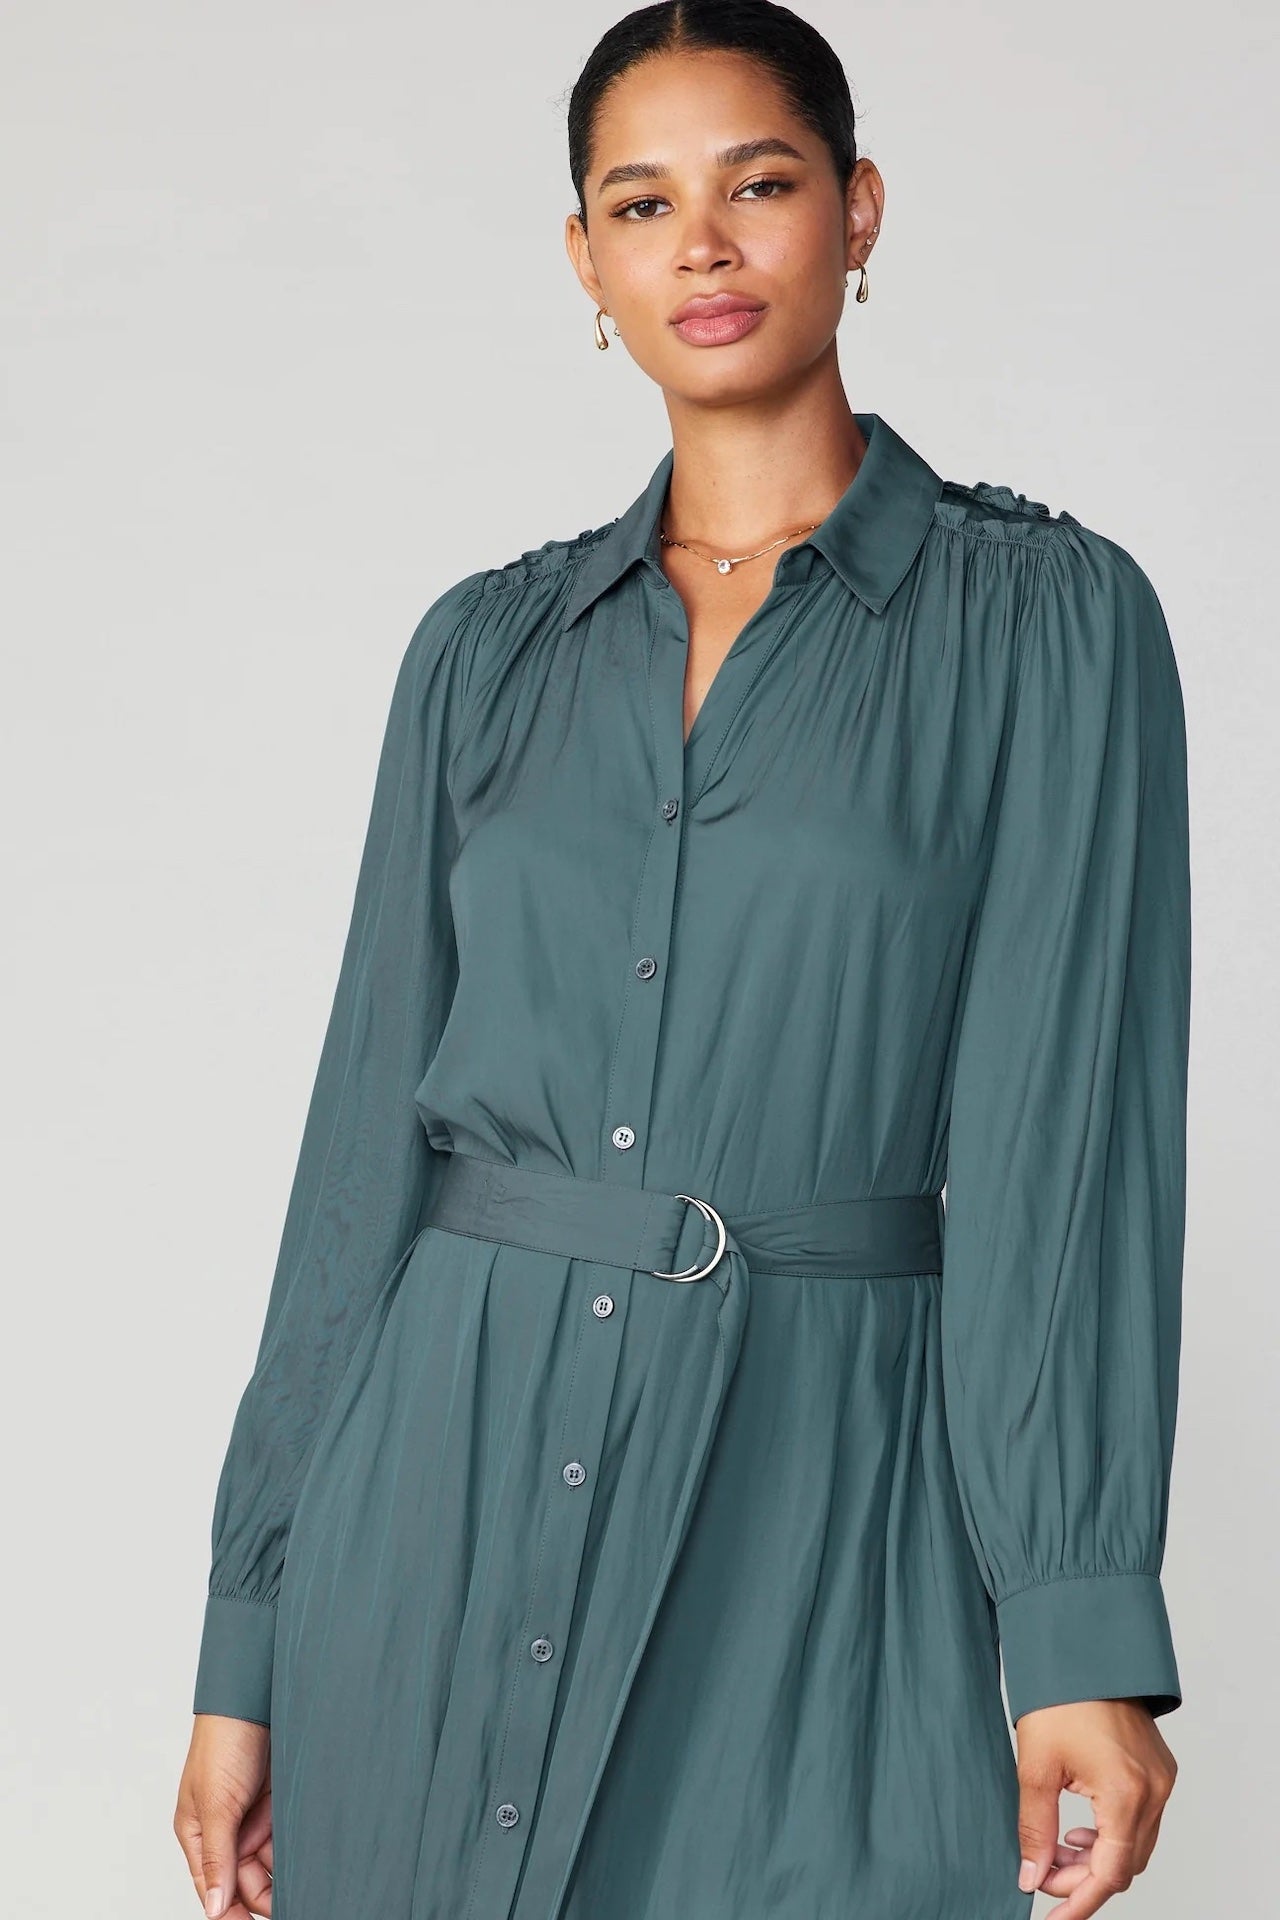 forest green midi long sleeve dress with a belt and button down style